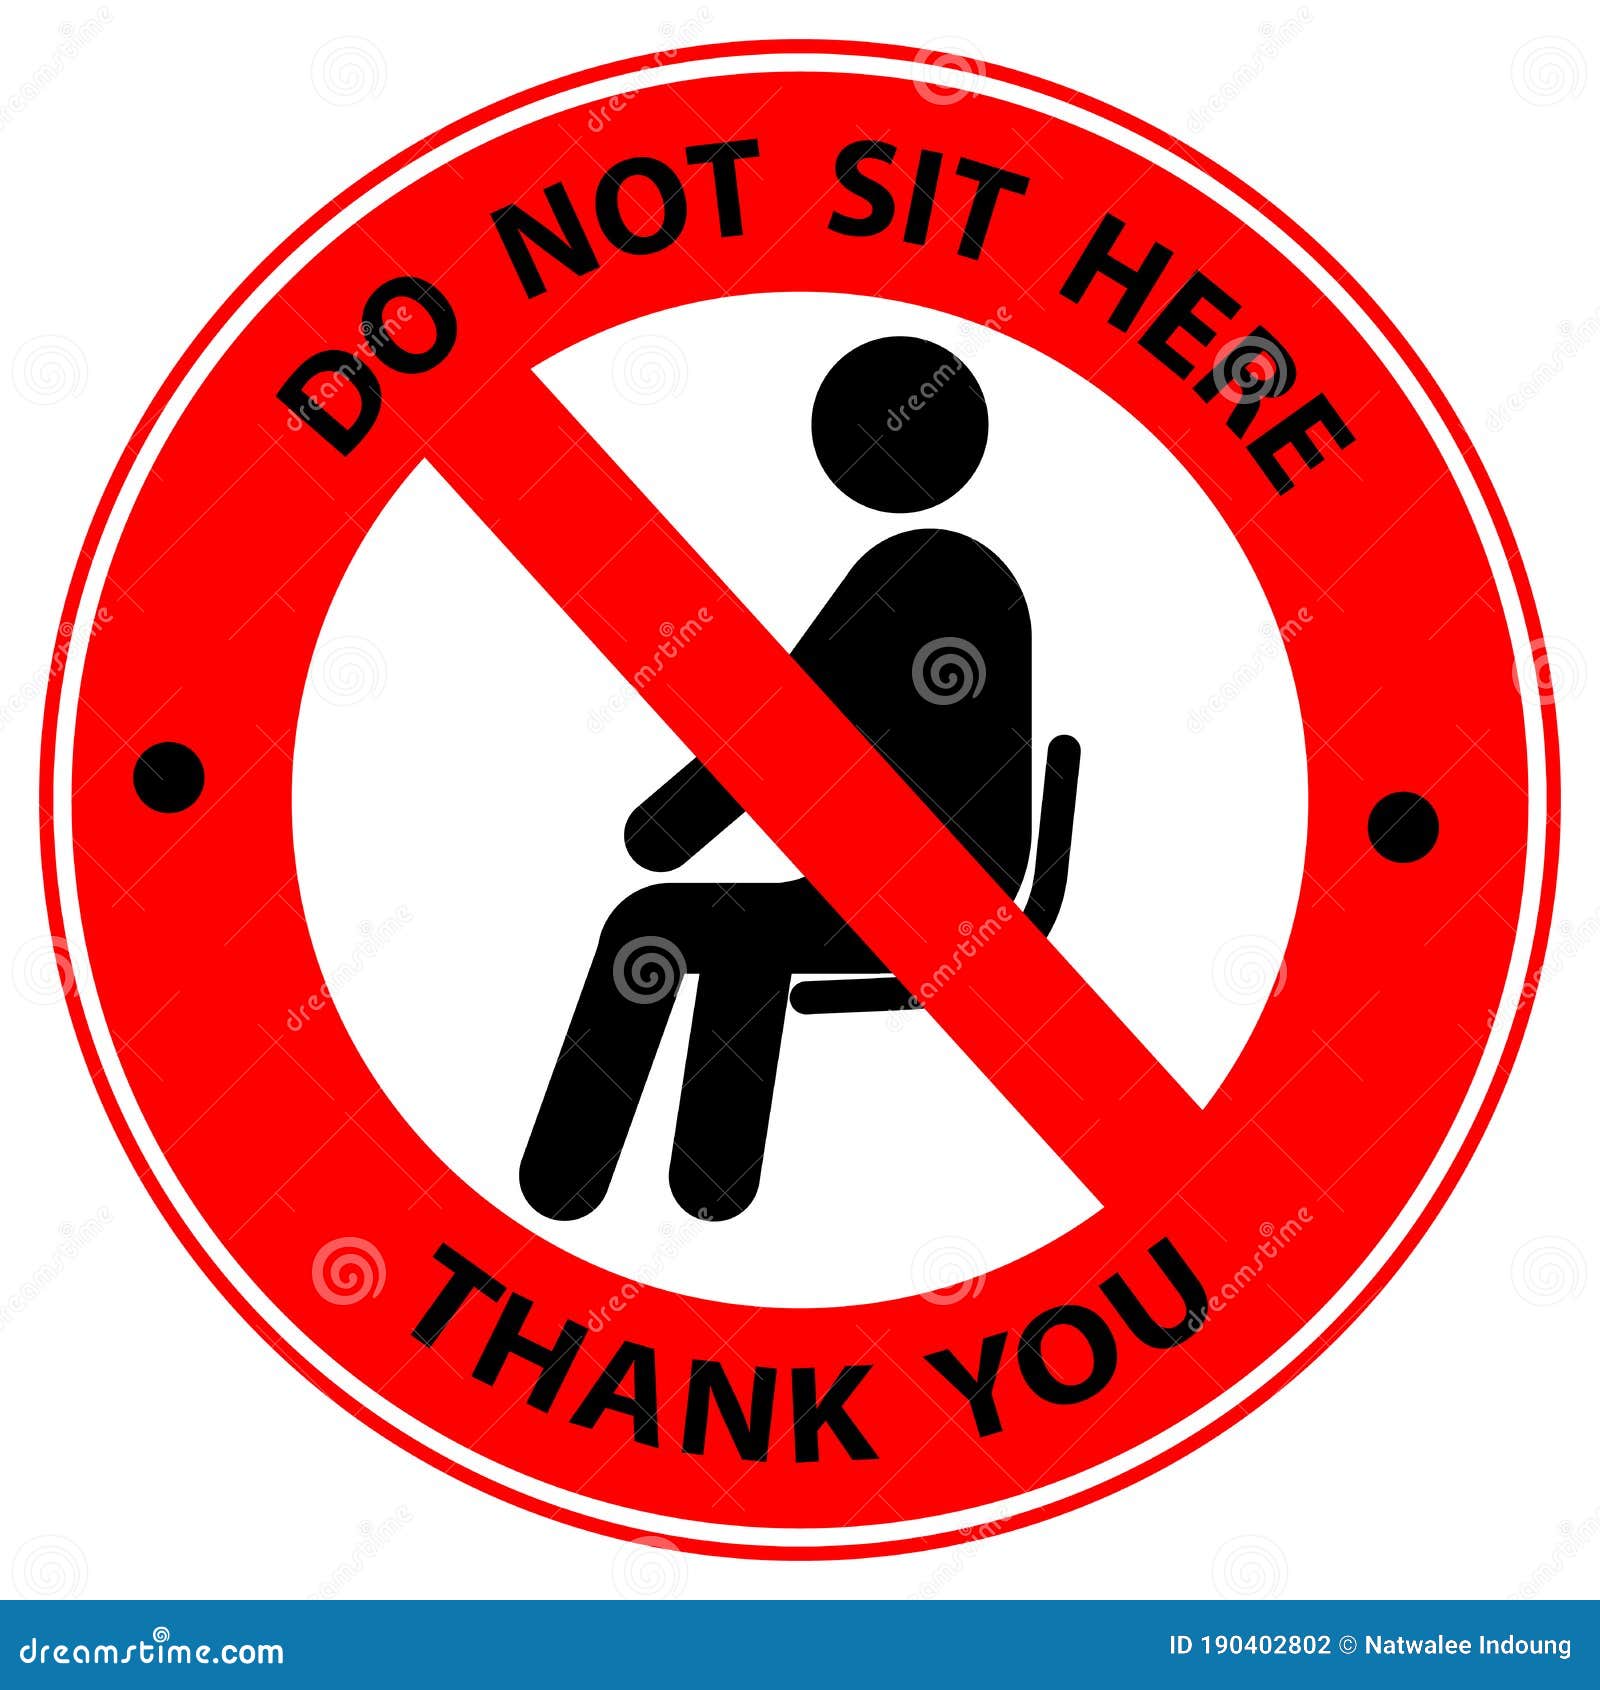 sit-cartoons-illustrations-vector-stock-images-100472-pictures-to